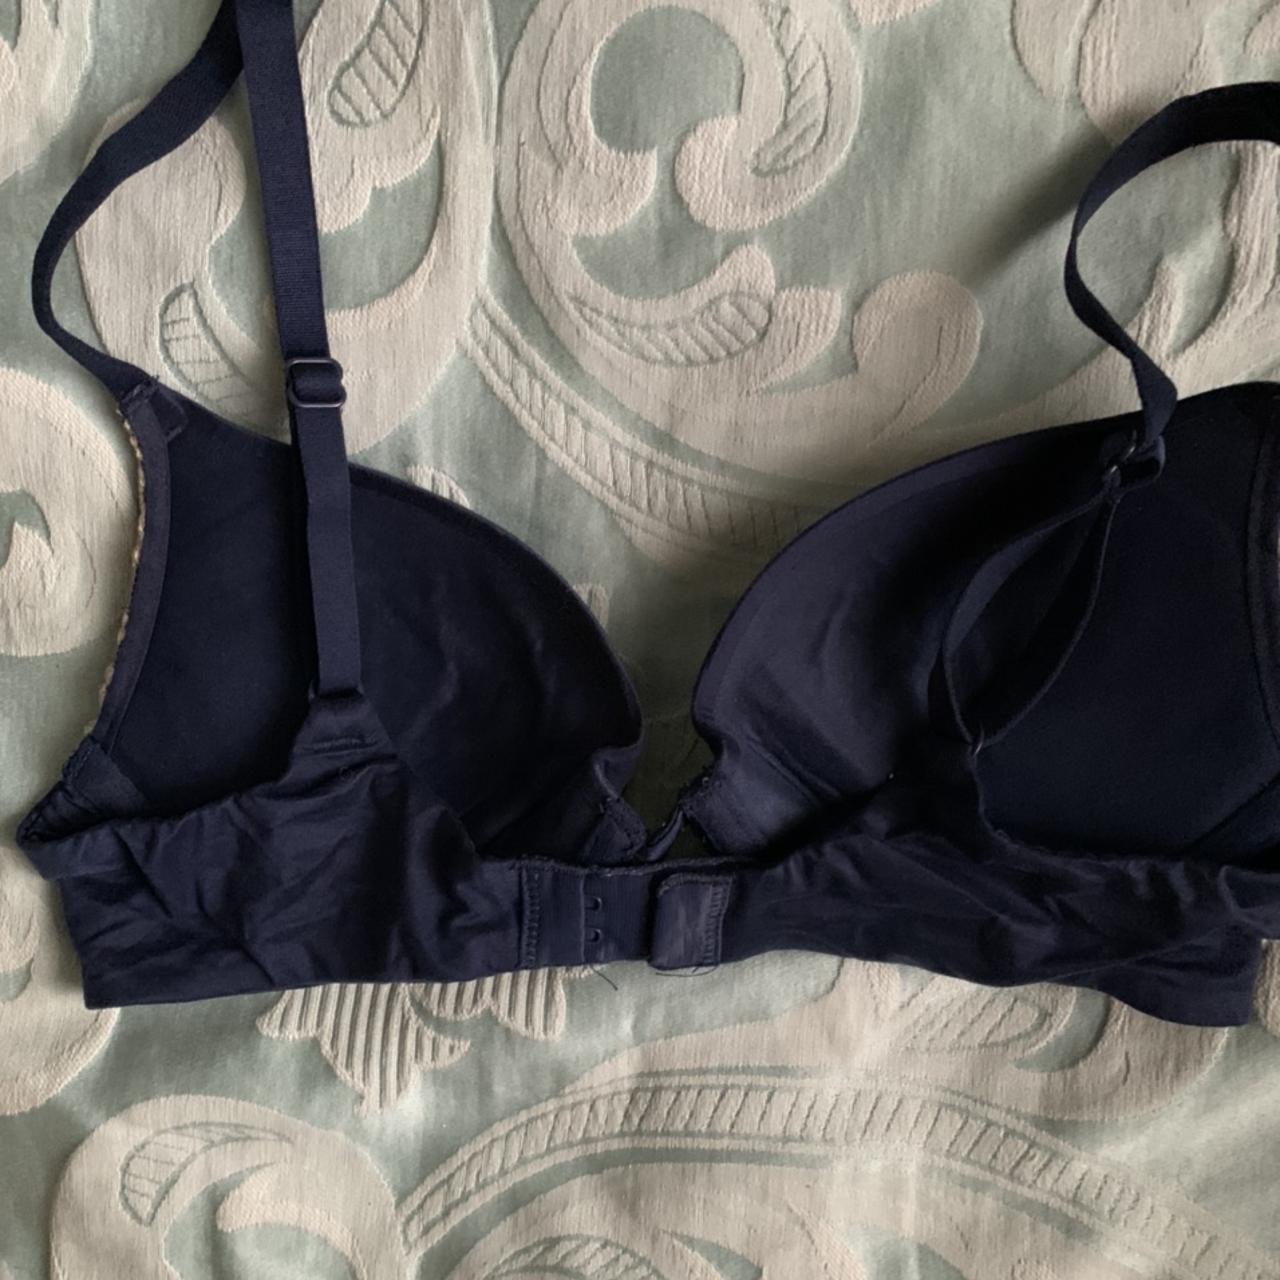 Victoria's Secret lace, padded bra New without tags - Depop